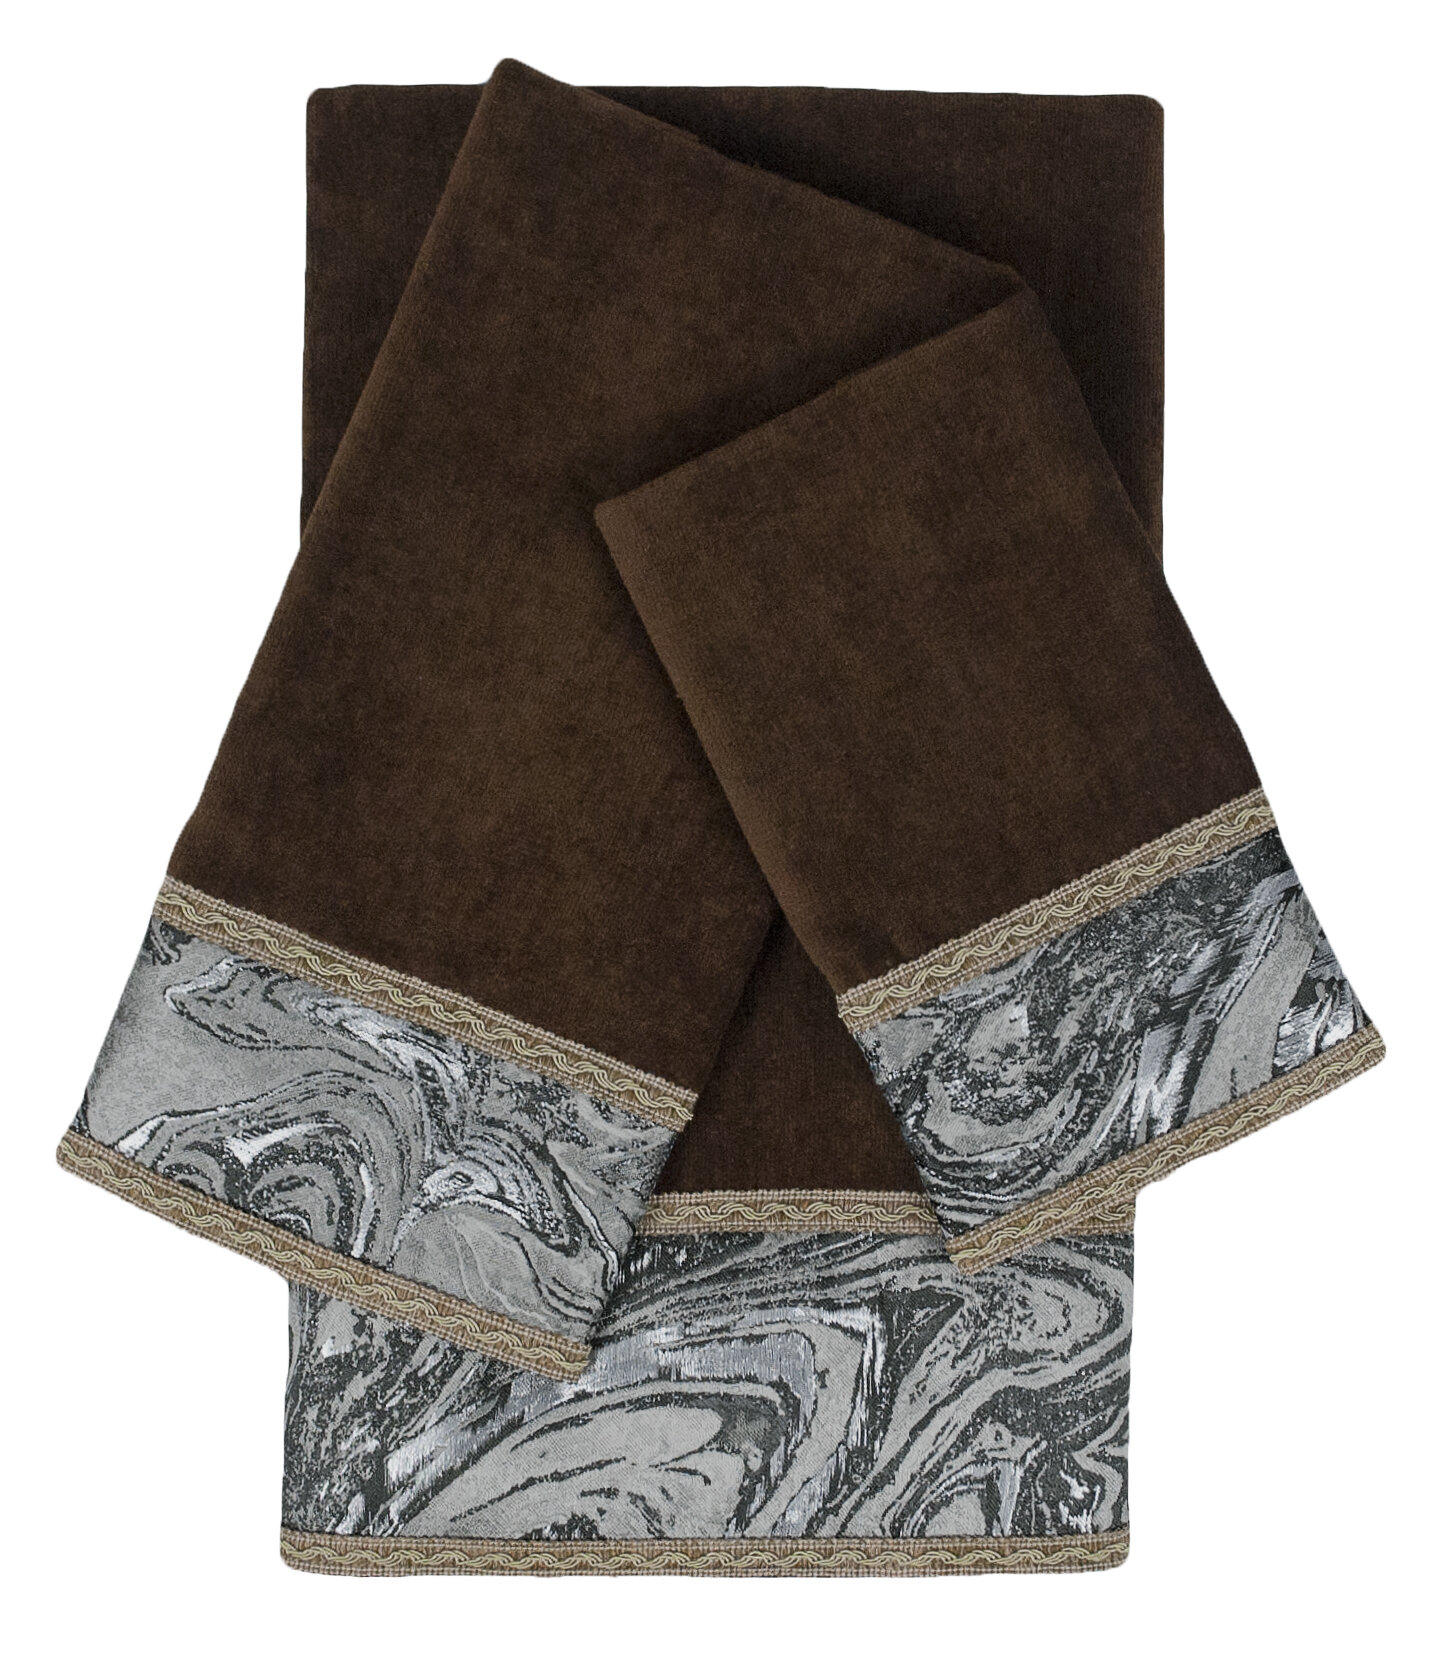 brown and gray towels